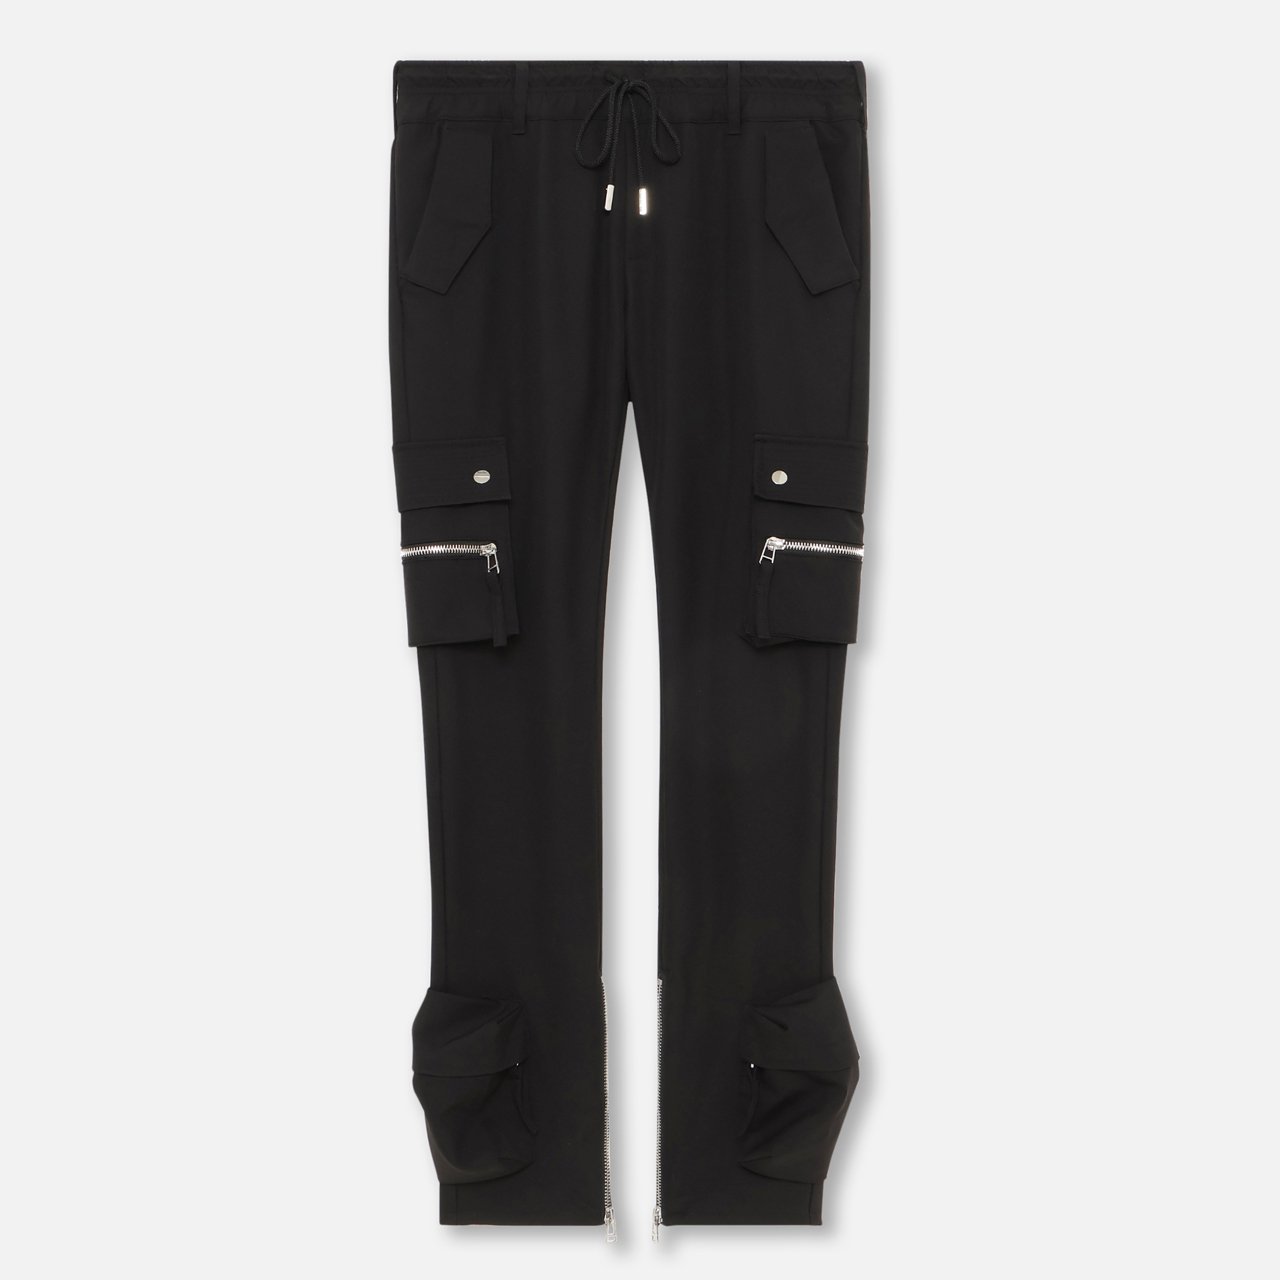 MLVINCE (メルヴィンス)｜TYPE-4 SLIM STRETCH CARGO PANTS BLACK 正規 